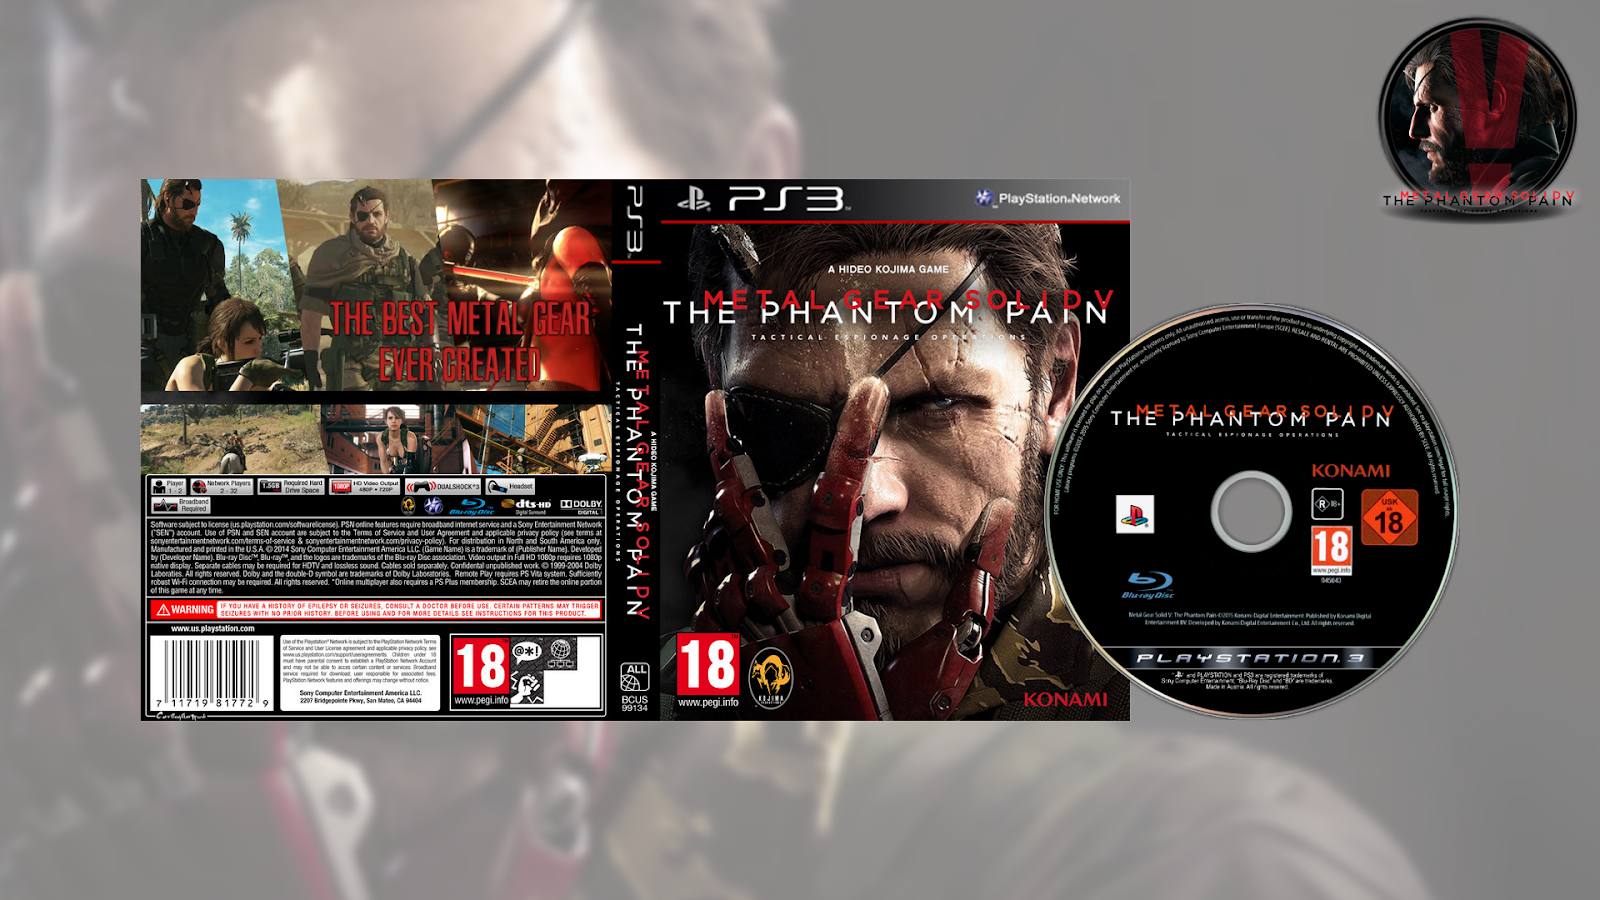 Download Metal Gear Solid V The Phantom Pain Usa Europe Japan Metal Gear Game Art 32x24 Poster Decor Png Image With No Background Pngkey Com